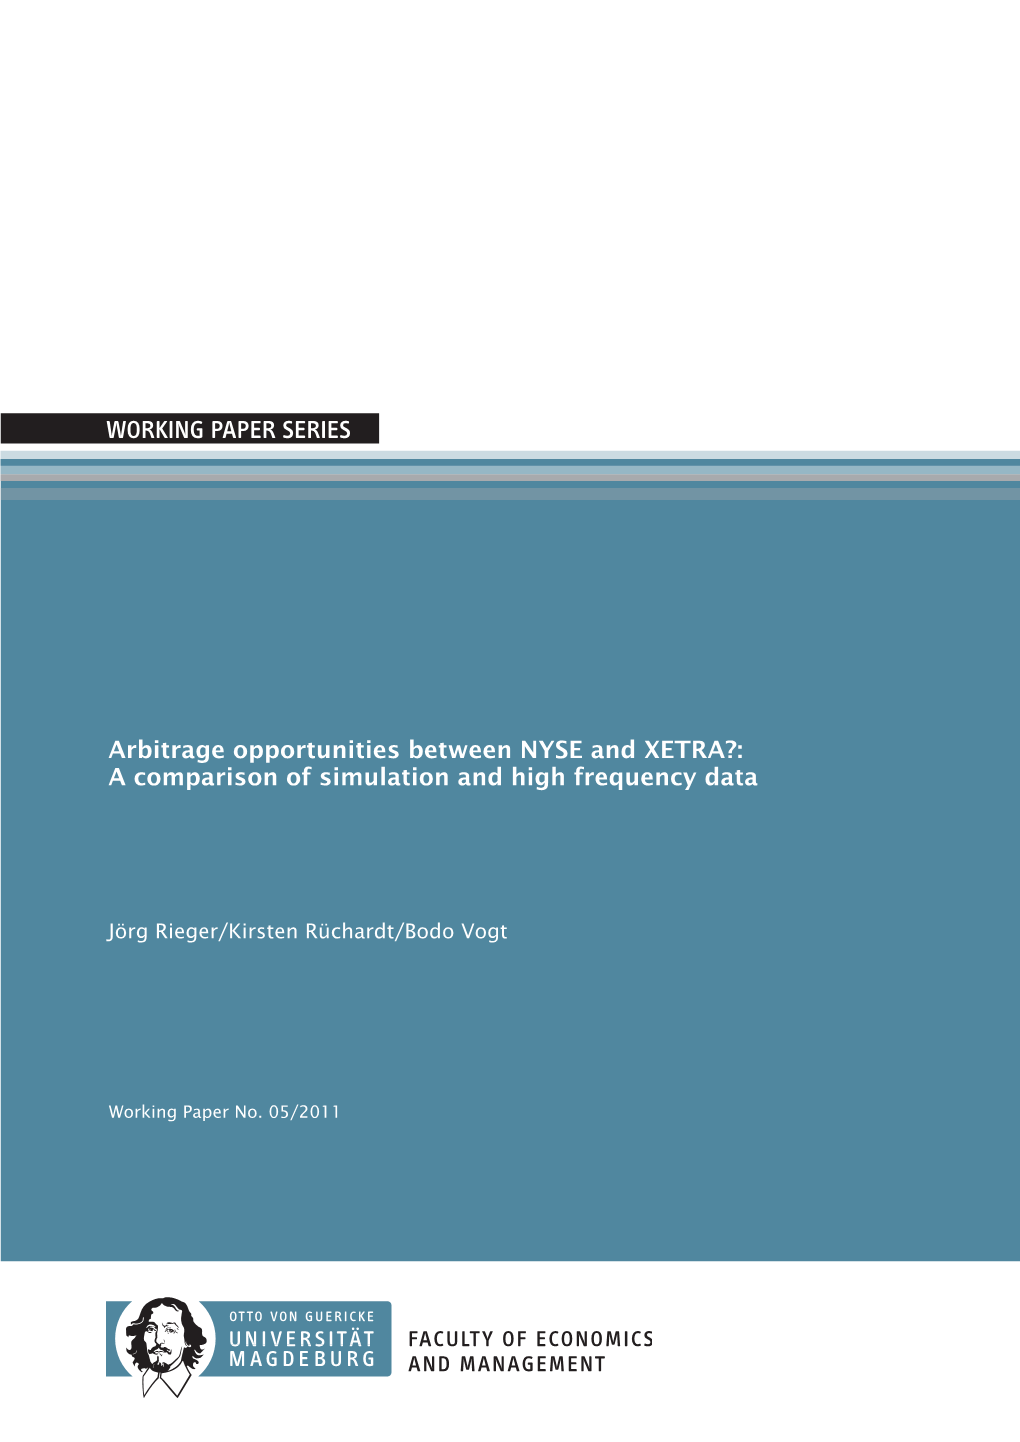 Arbitrage Opportunities Between NYSE and XETRA?: a Comparison of Simulation and High Frequency Data